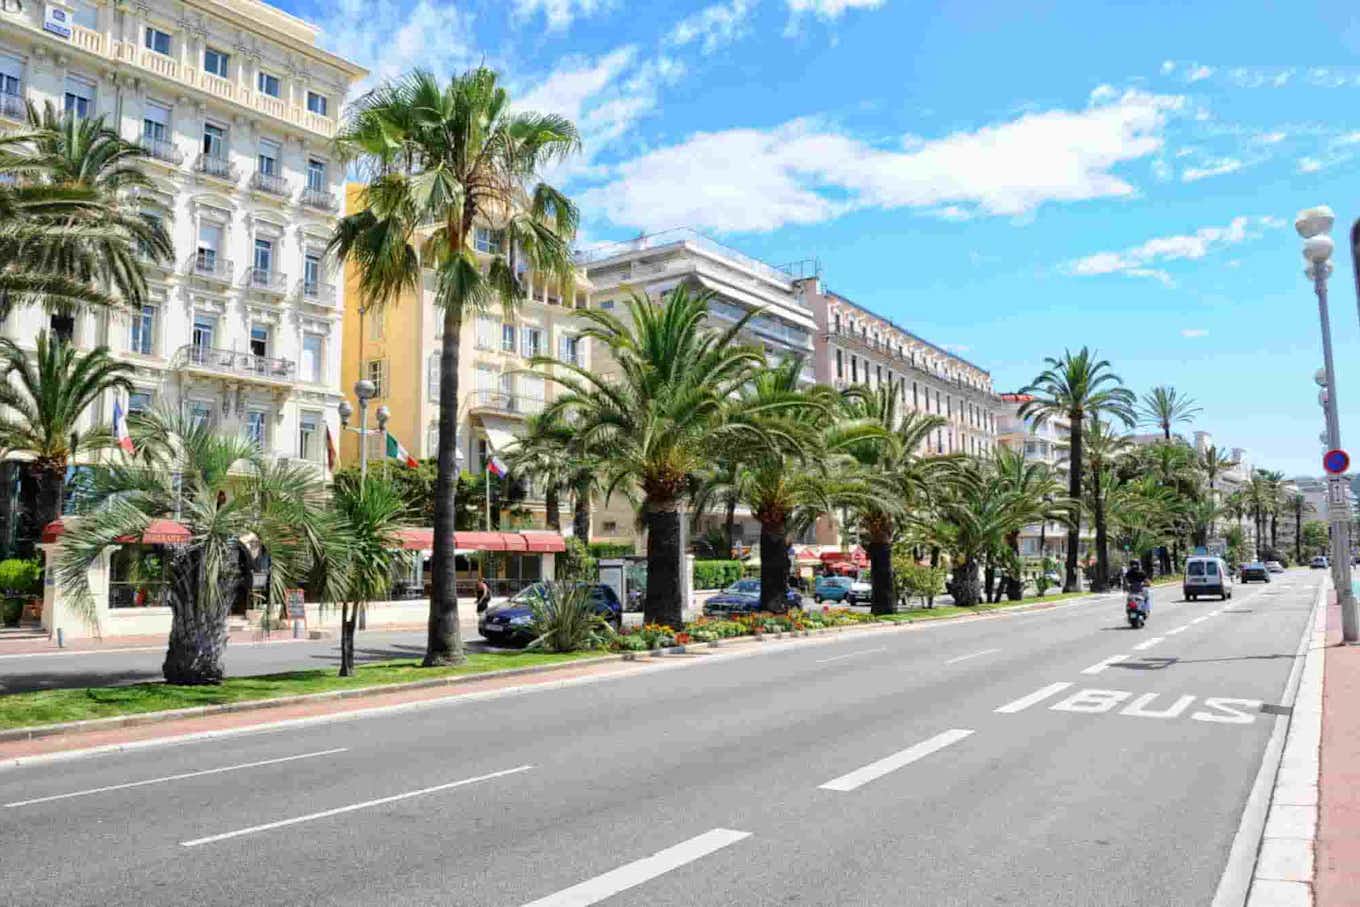 A road in Nice with palm trees